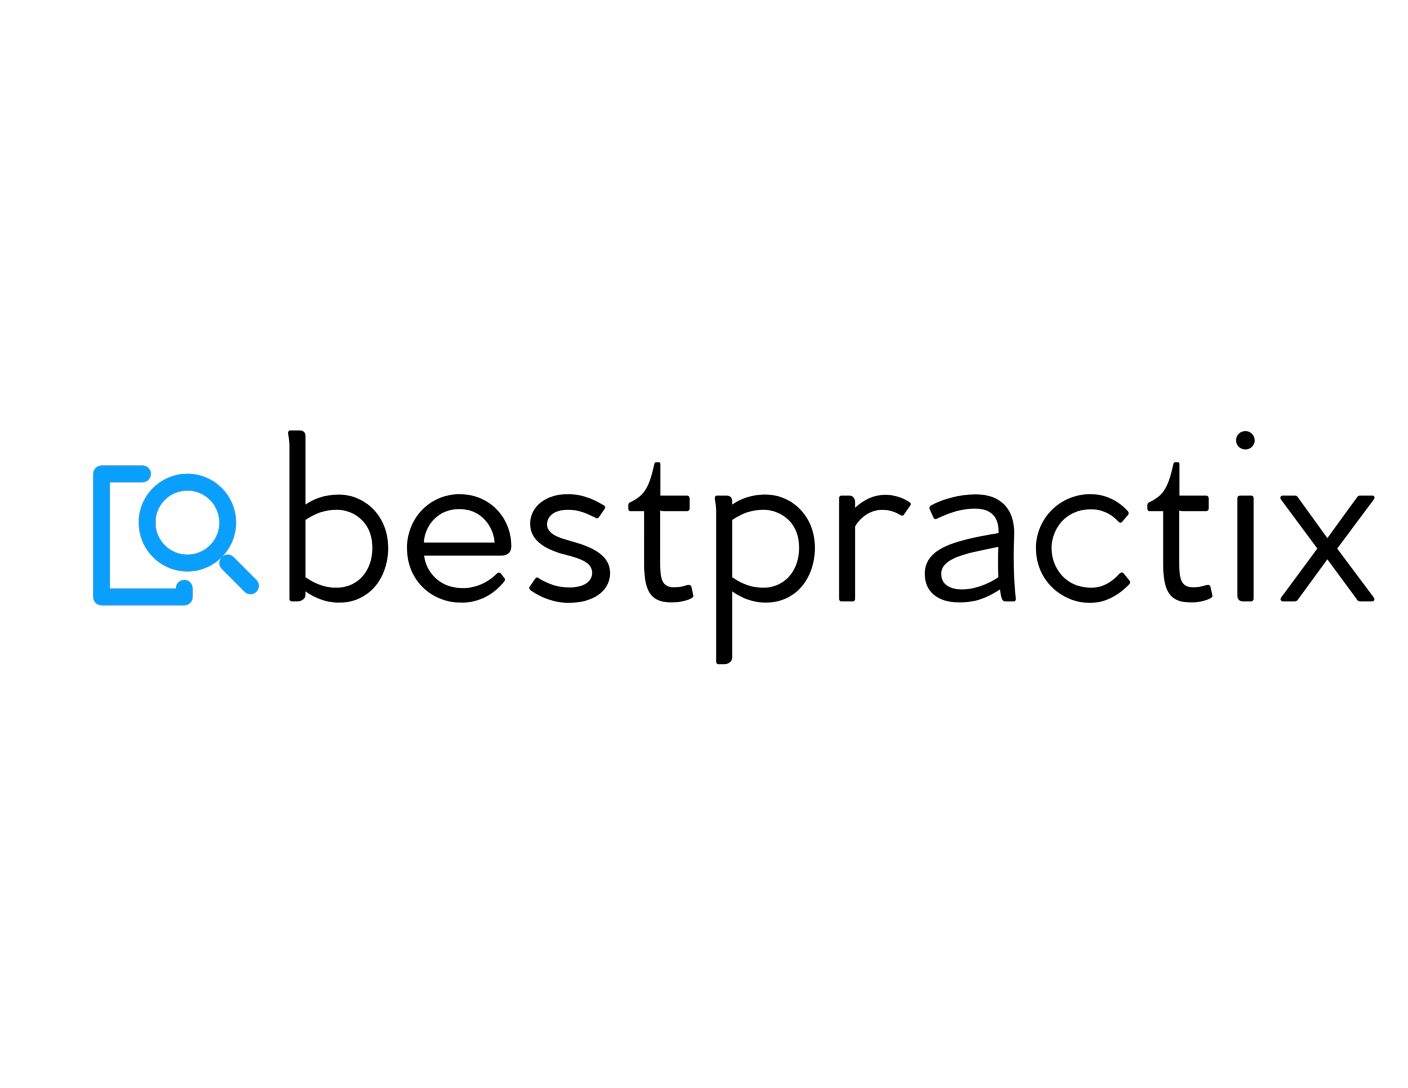 Bestpractix – The future of legal contract drafting!